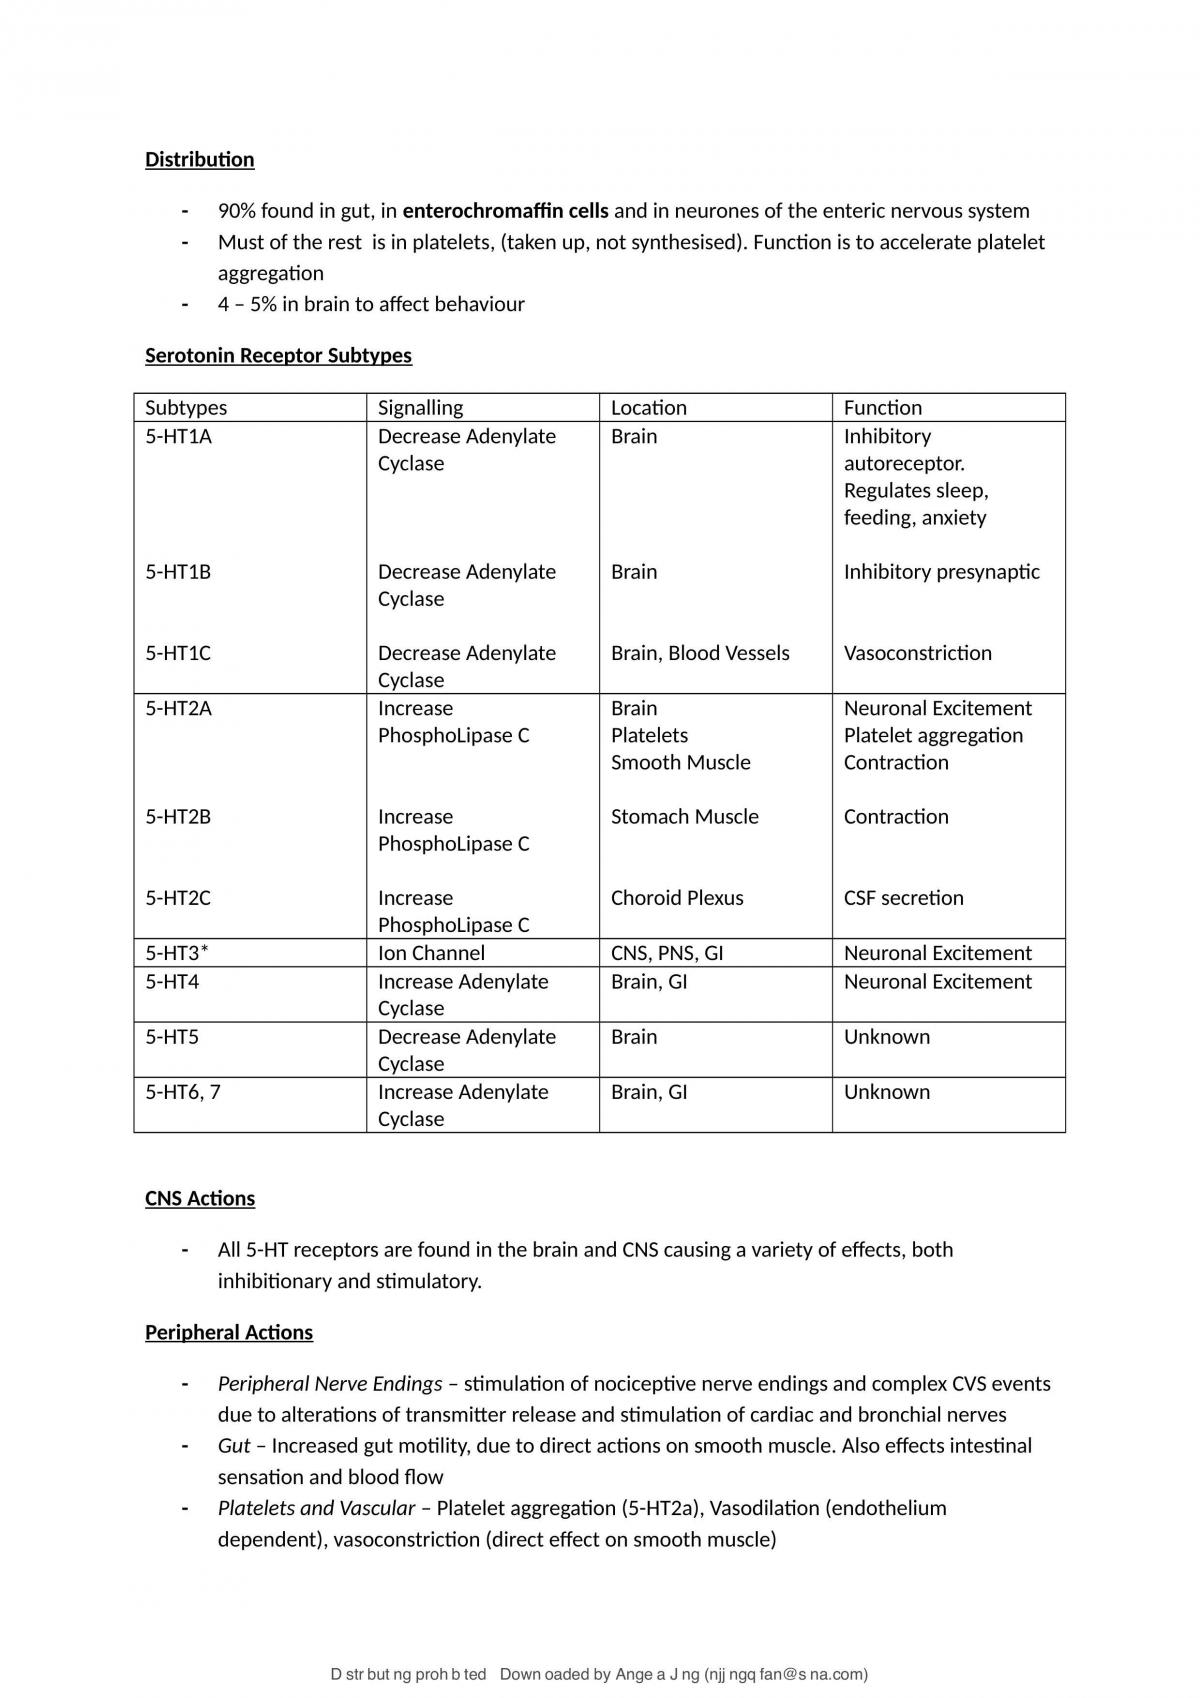 Full Notes for Introductory Pharmacology and Toxicology - Page 36